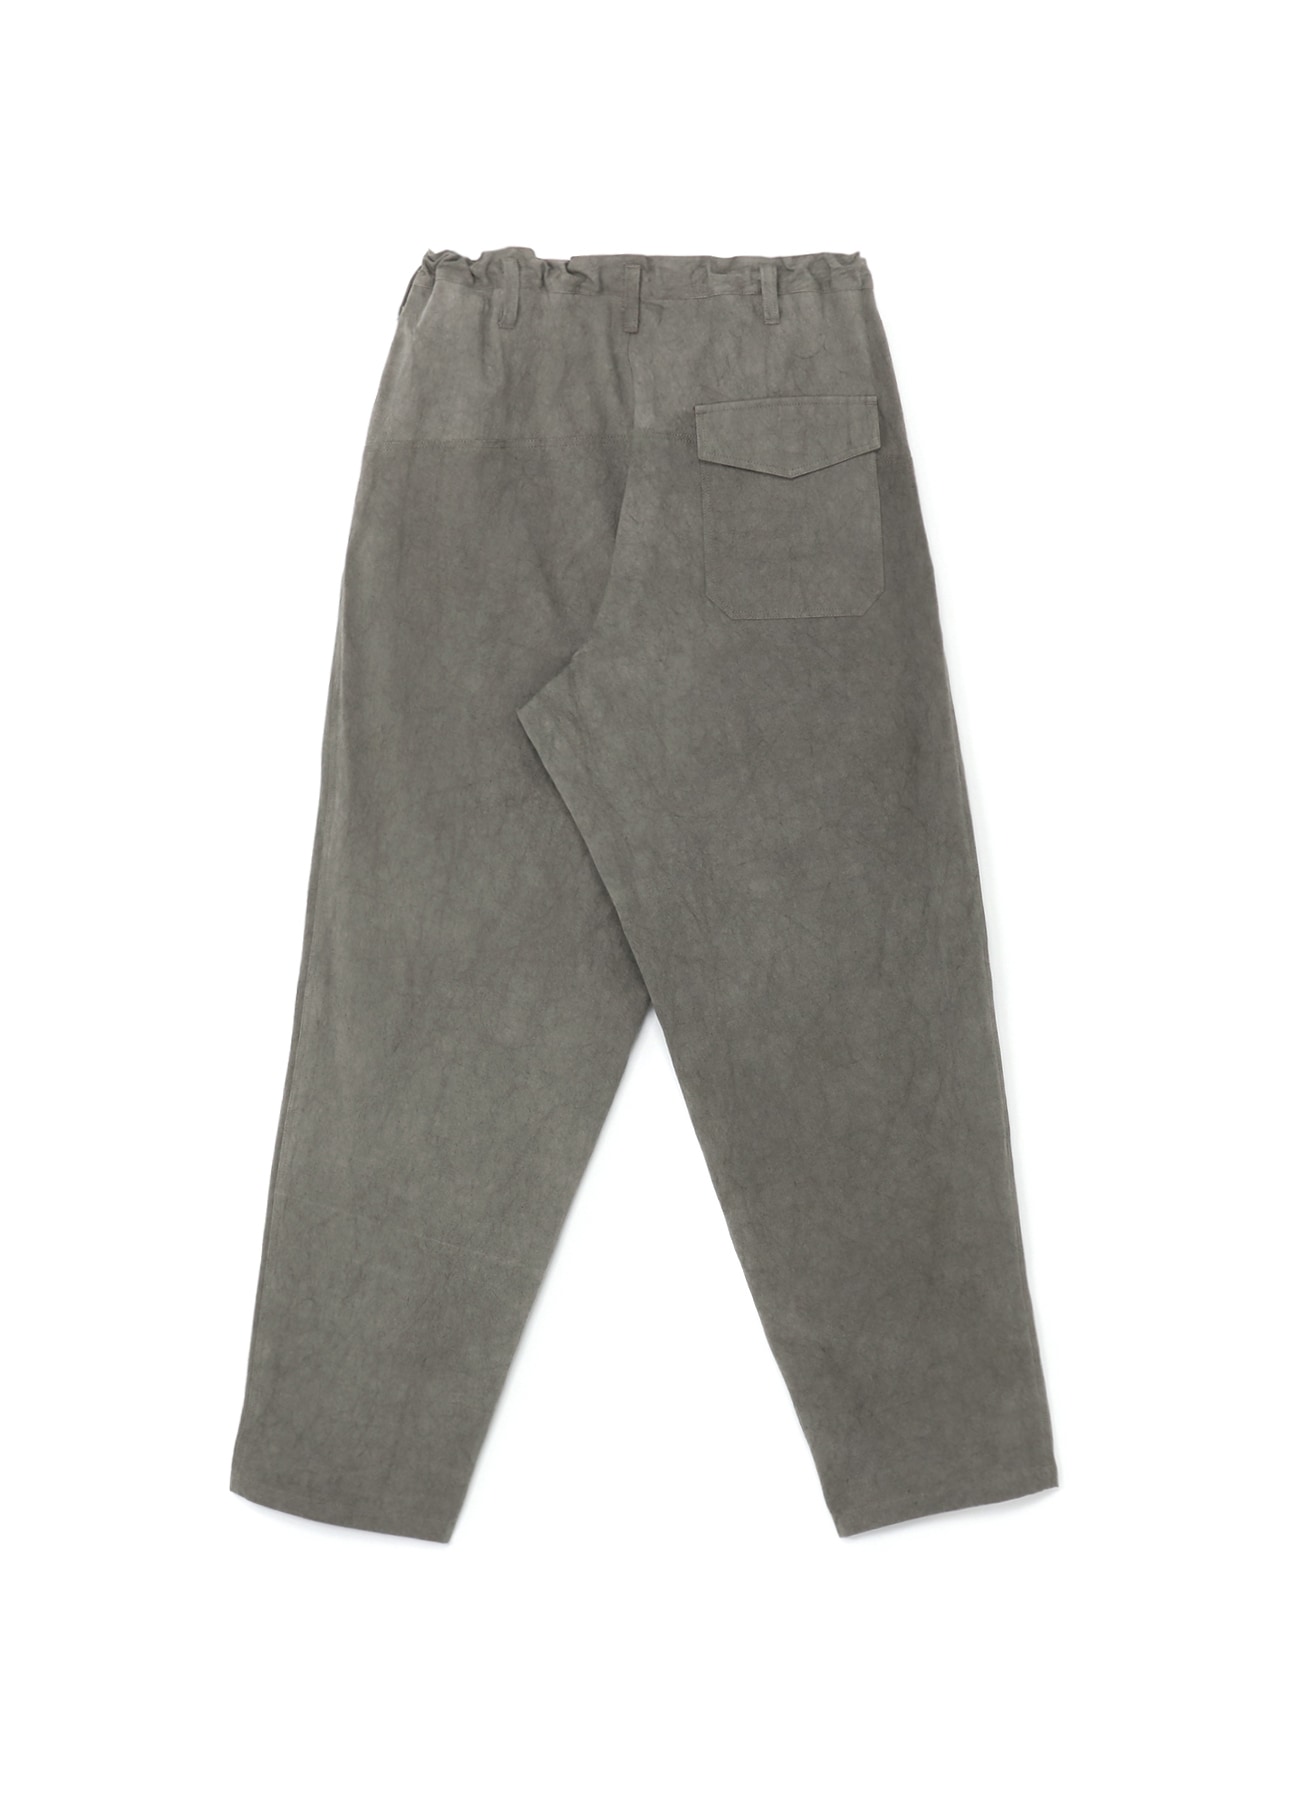 COTTON LINEN SULFIDED OZONE WORK PANTS WITH STRING(XS Charcoal 